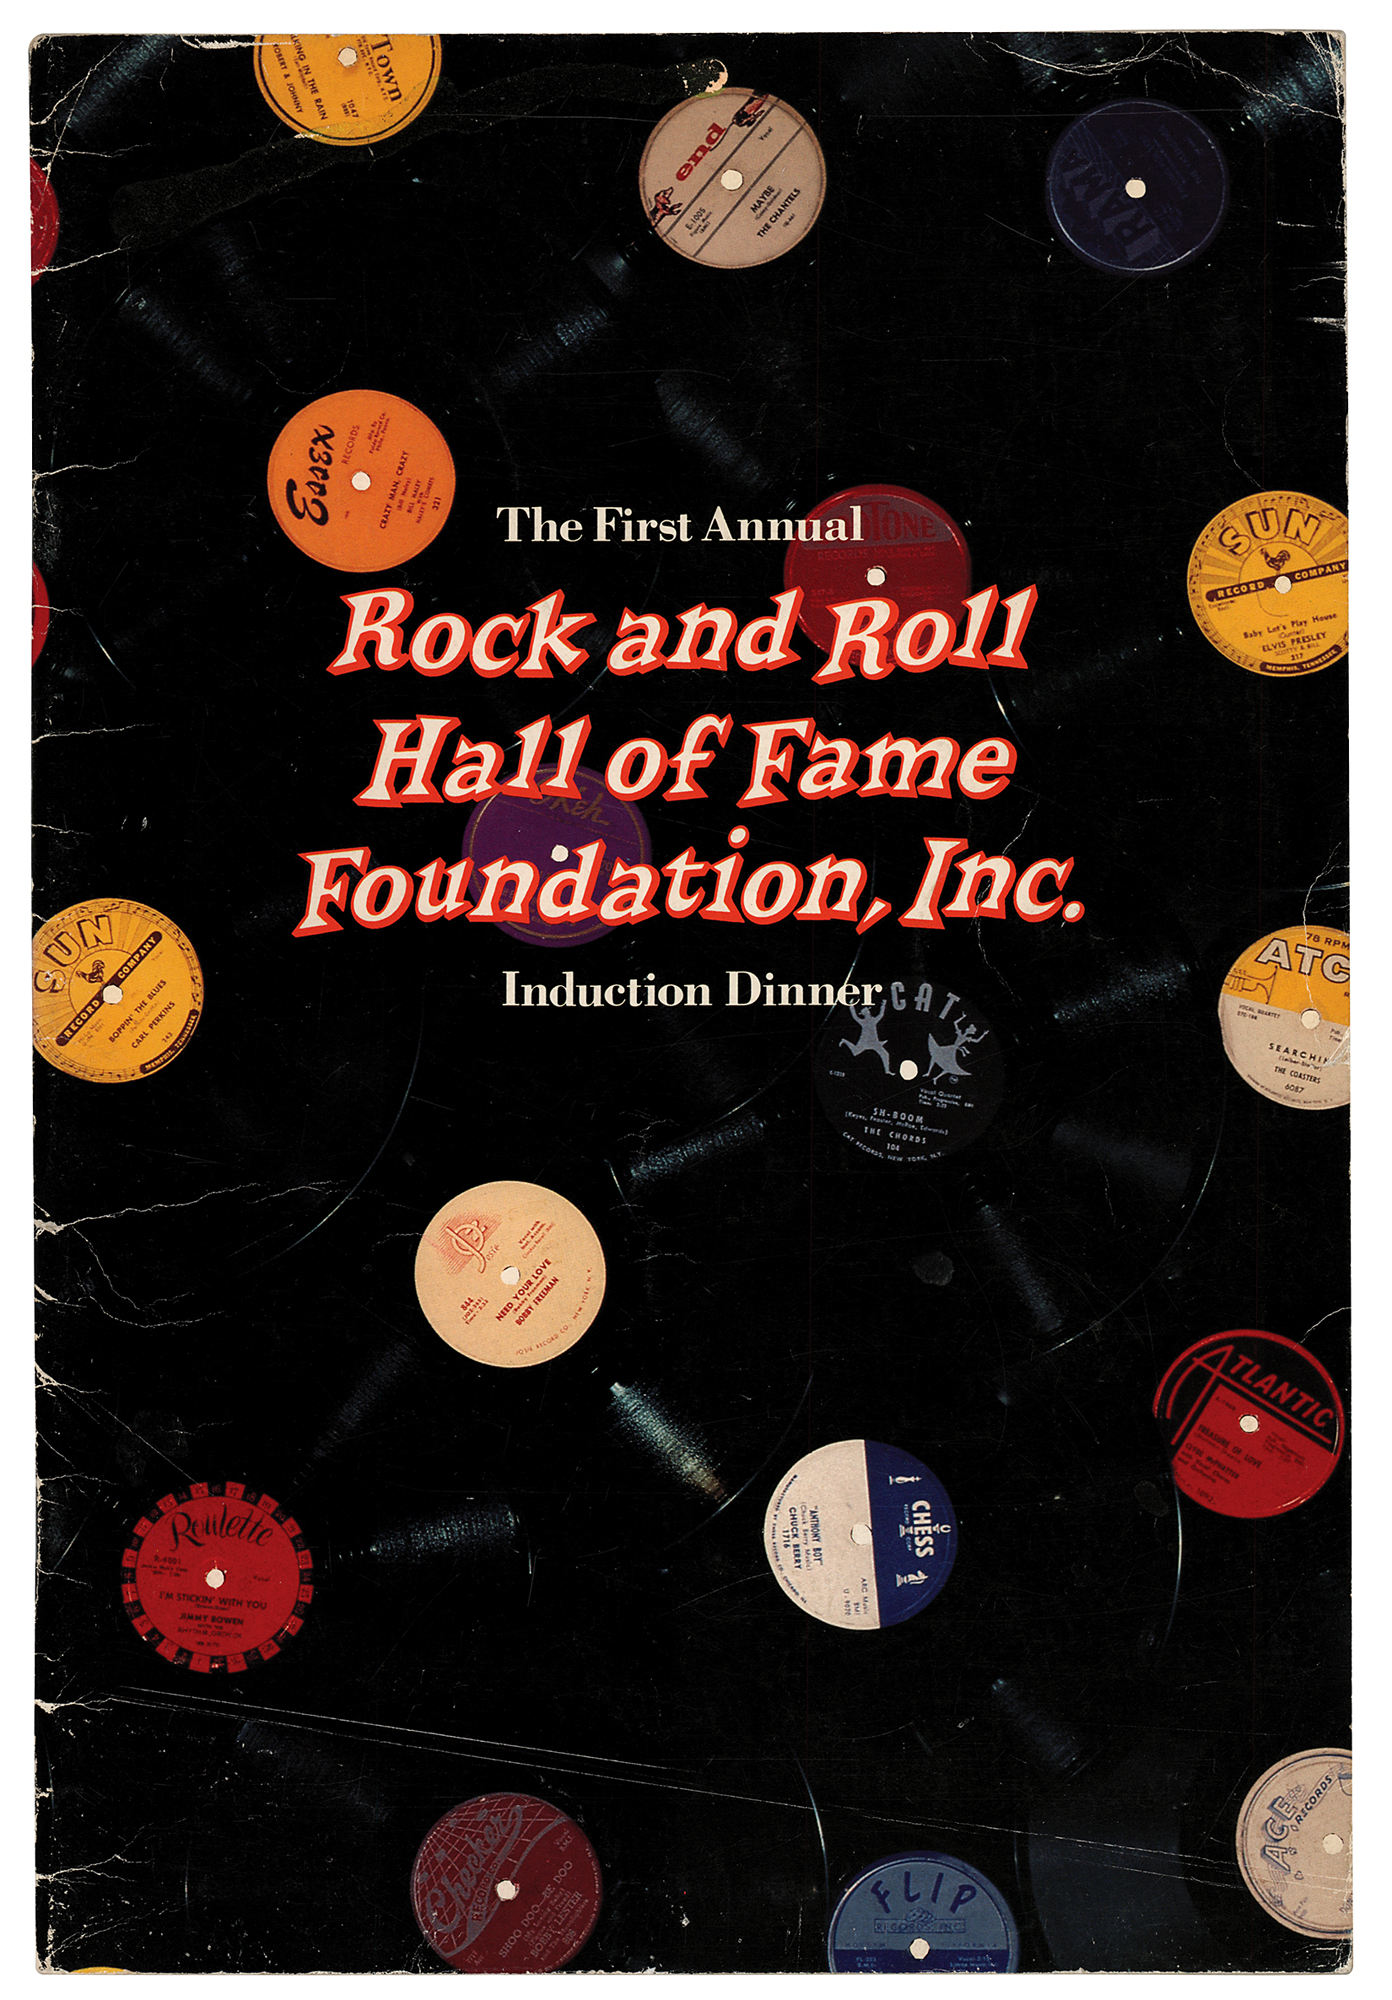 Lot #2187 Elvis Presley, Chuck Berry, Little Richard, and Others 1986 Rock and Roll Hall of Fame Program